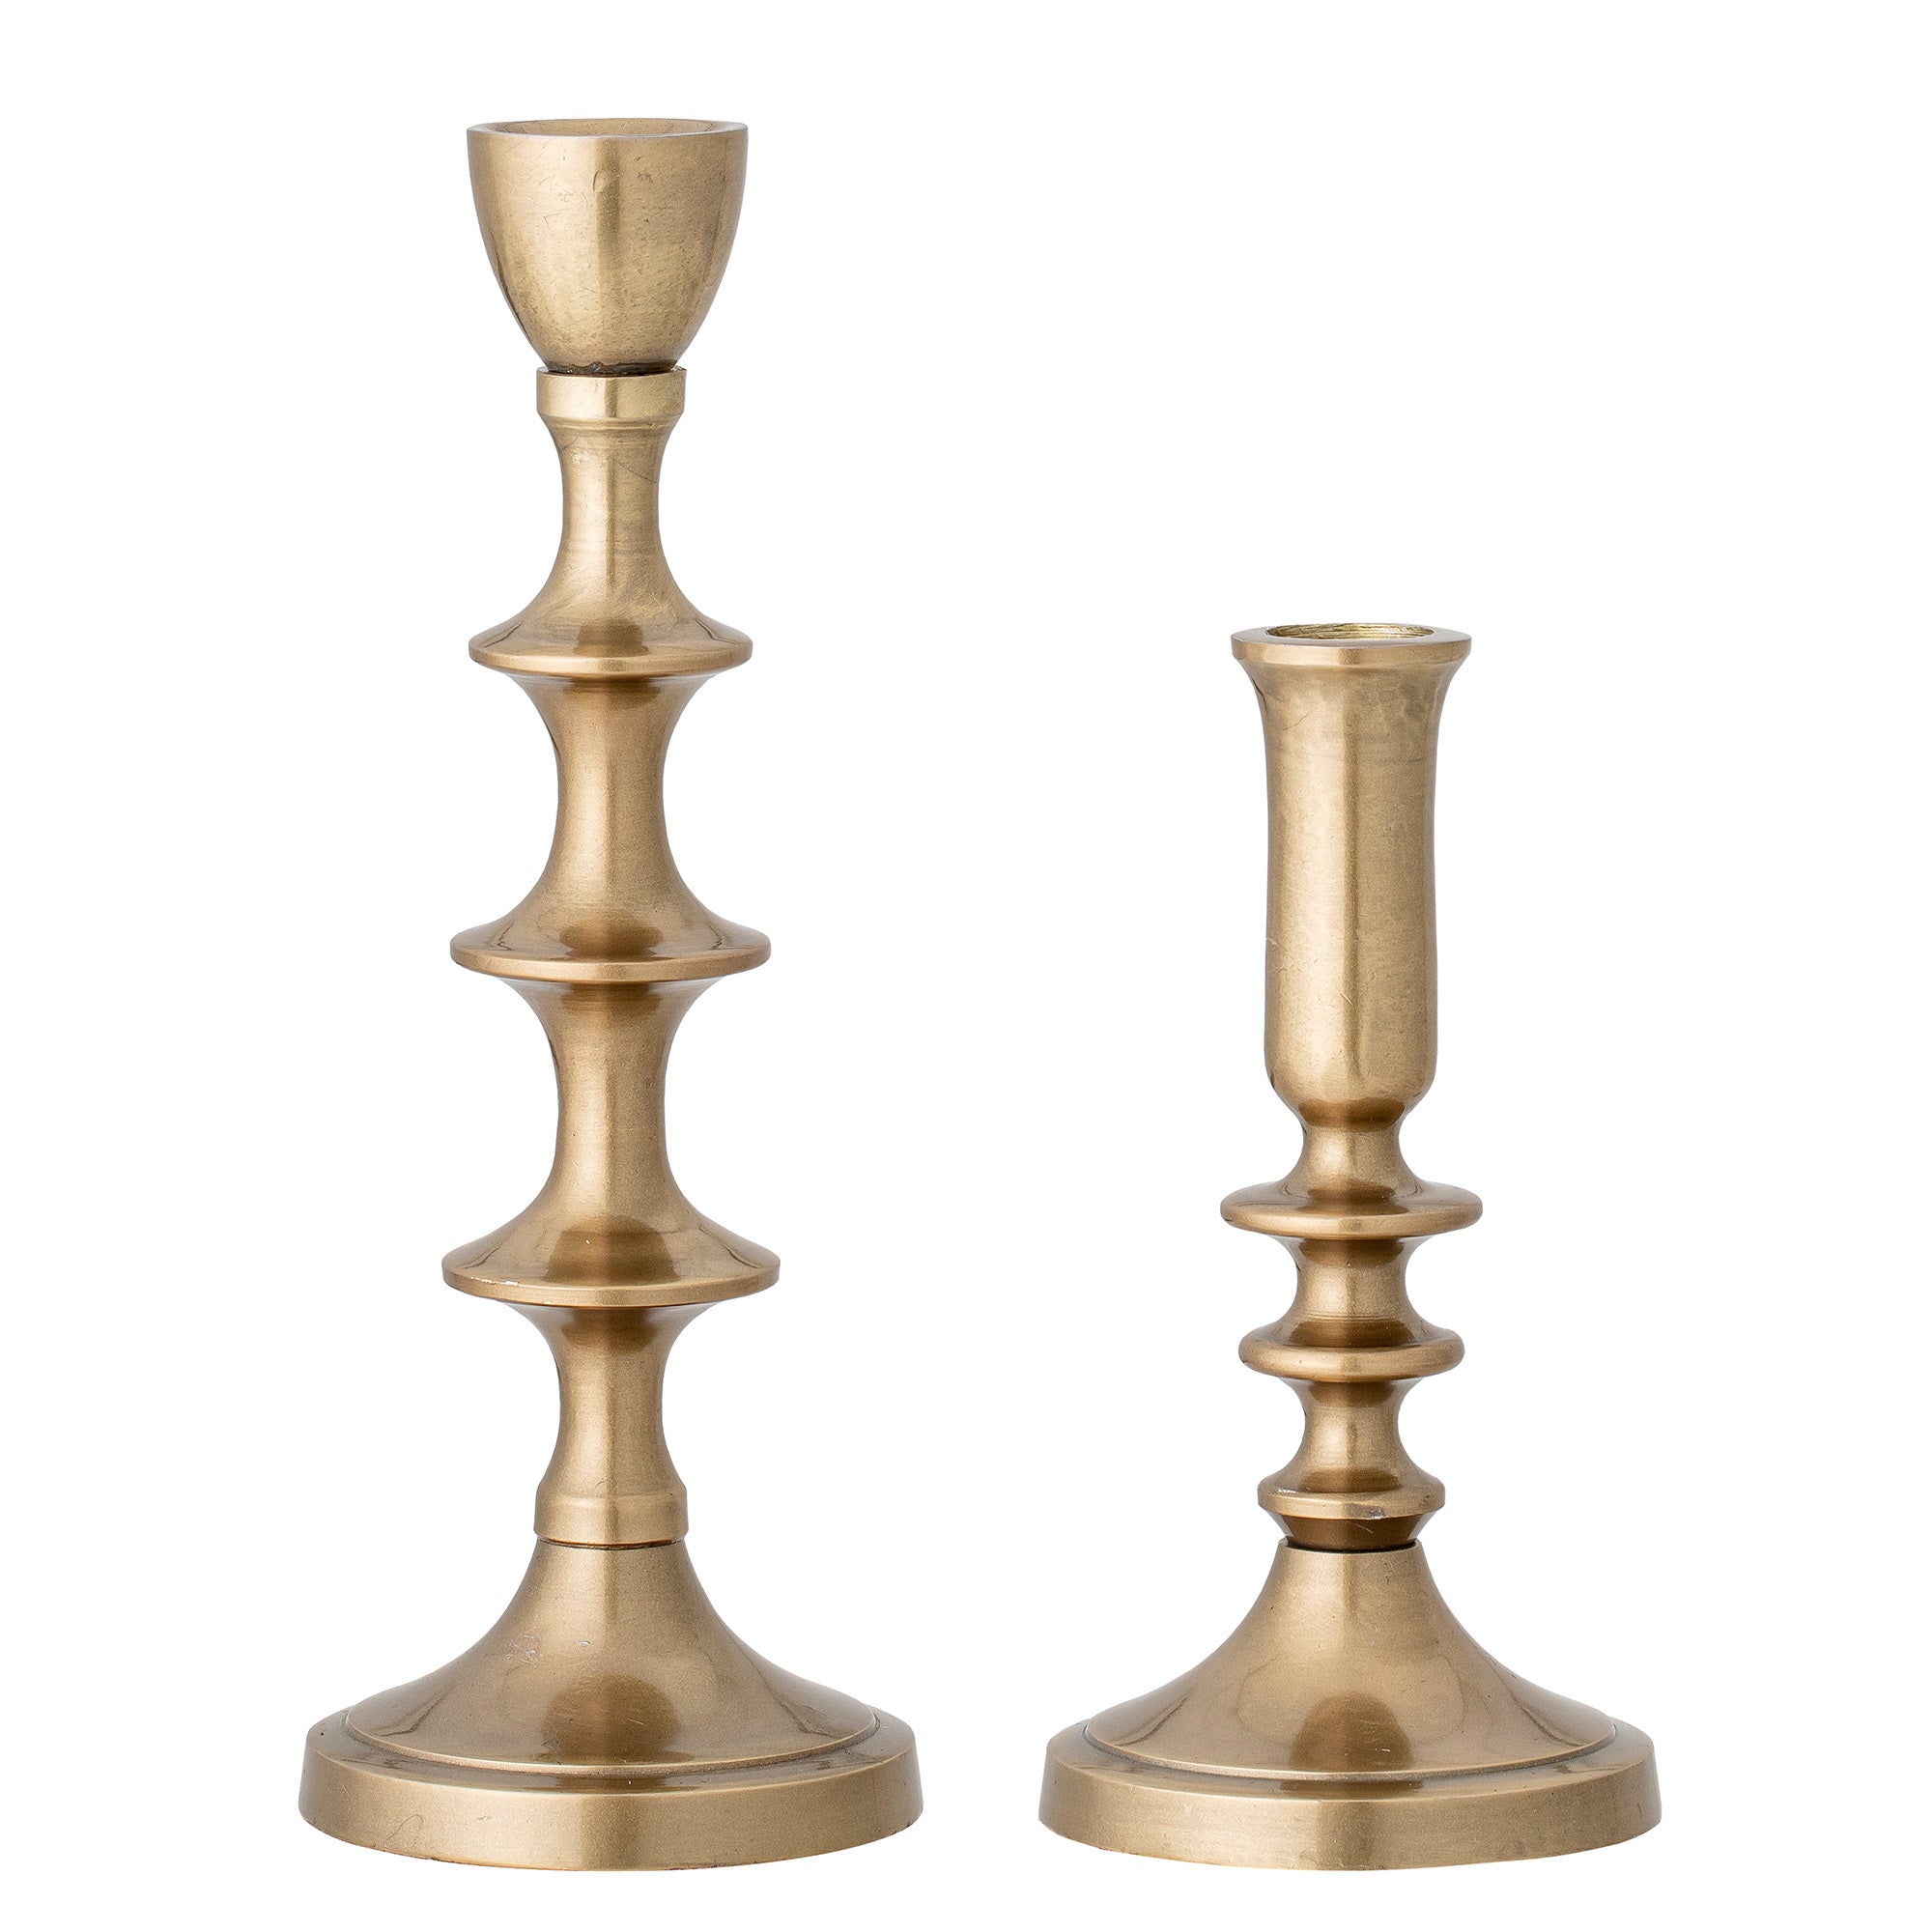 Candles give the rooms a warm glow. With the Elisa candlestick set, made of aluminum and painted in a wonderful brass color, every home place will gain an interesting and practical addition. It will fit in particular into the living room with a classic decor, in which you need coziness. The bedroom with retro decor will become even more romantic, and the bathroom finished in the boho climate will allow relaxation.